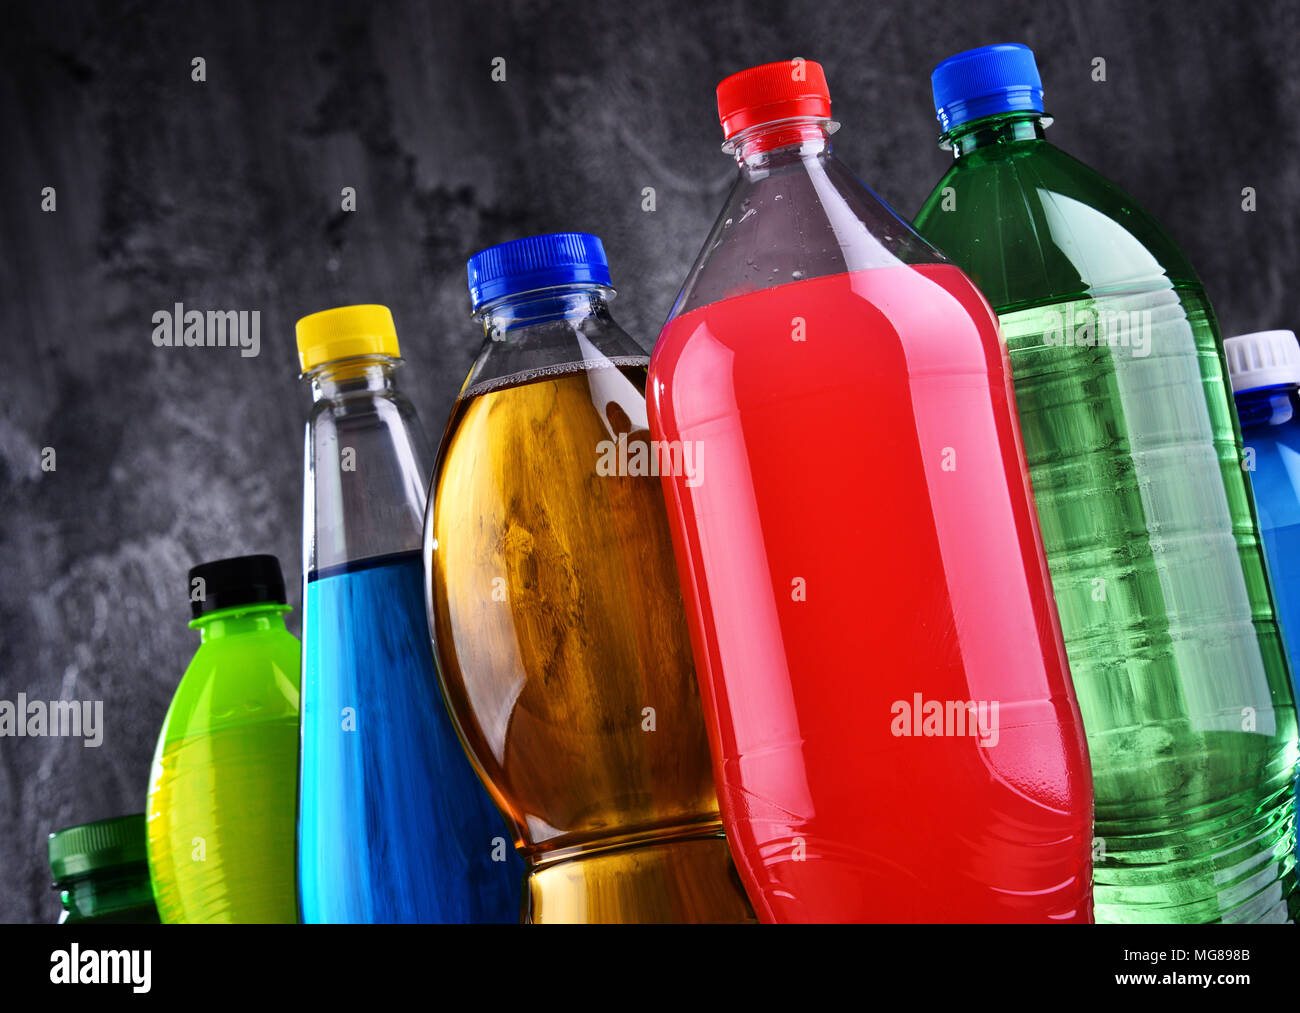 Plastic bottles of assorted carbonated soft drinks in variety of colors Stock Photo